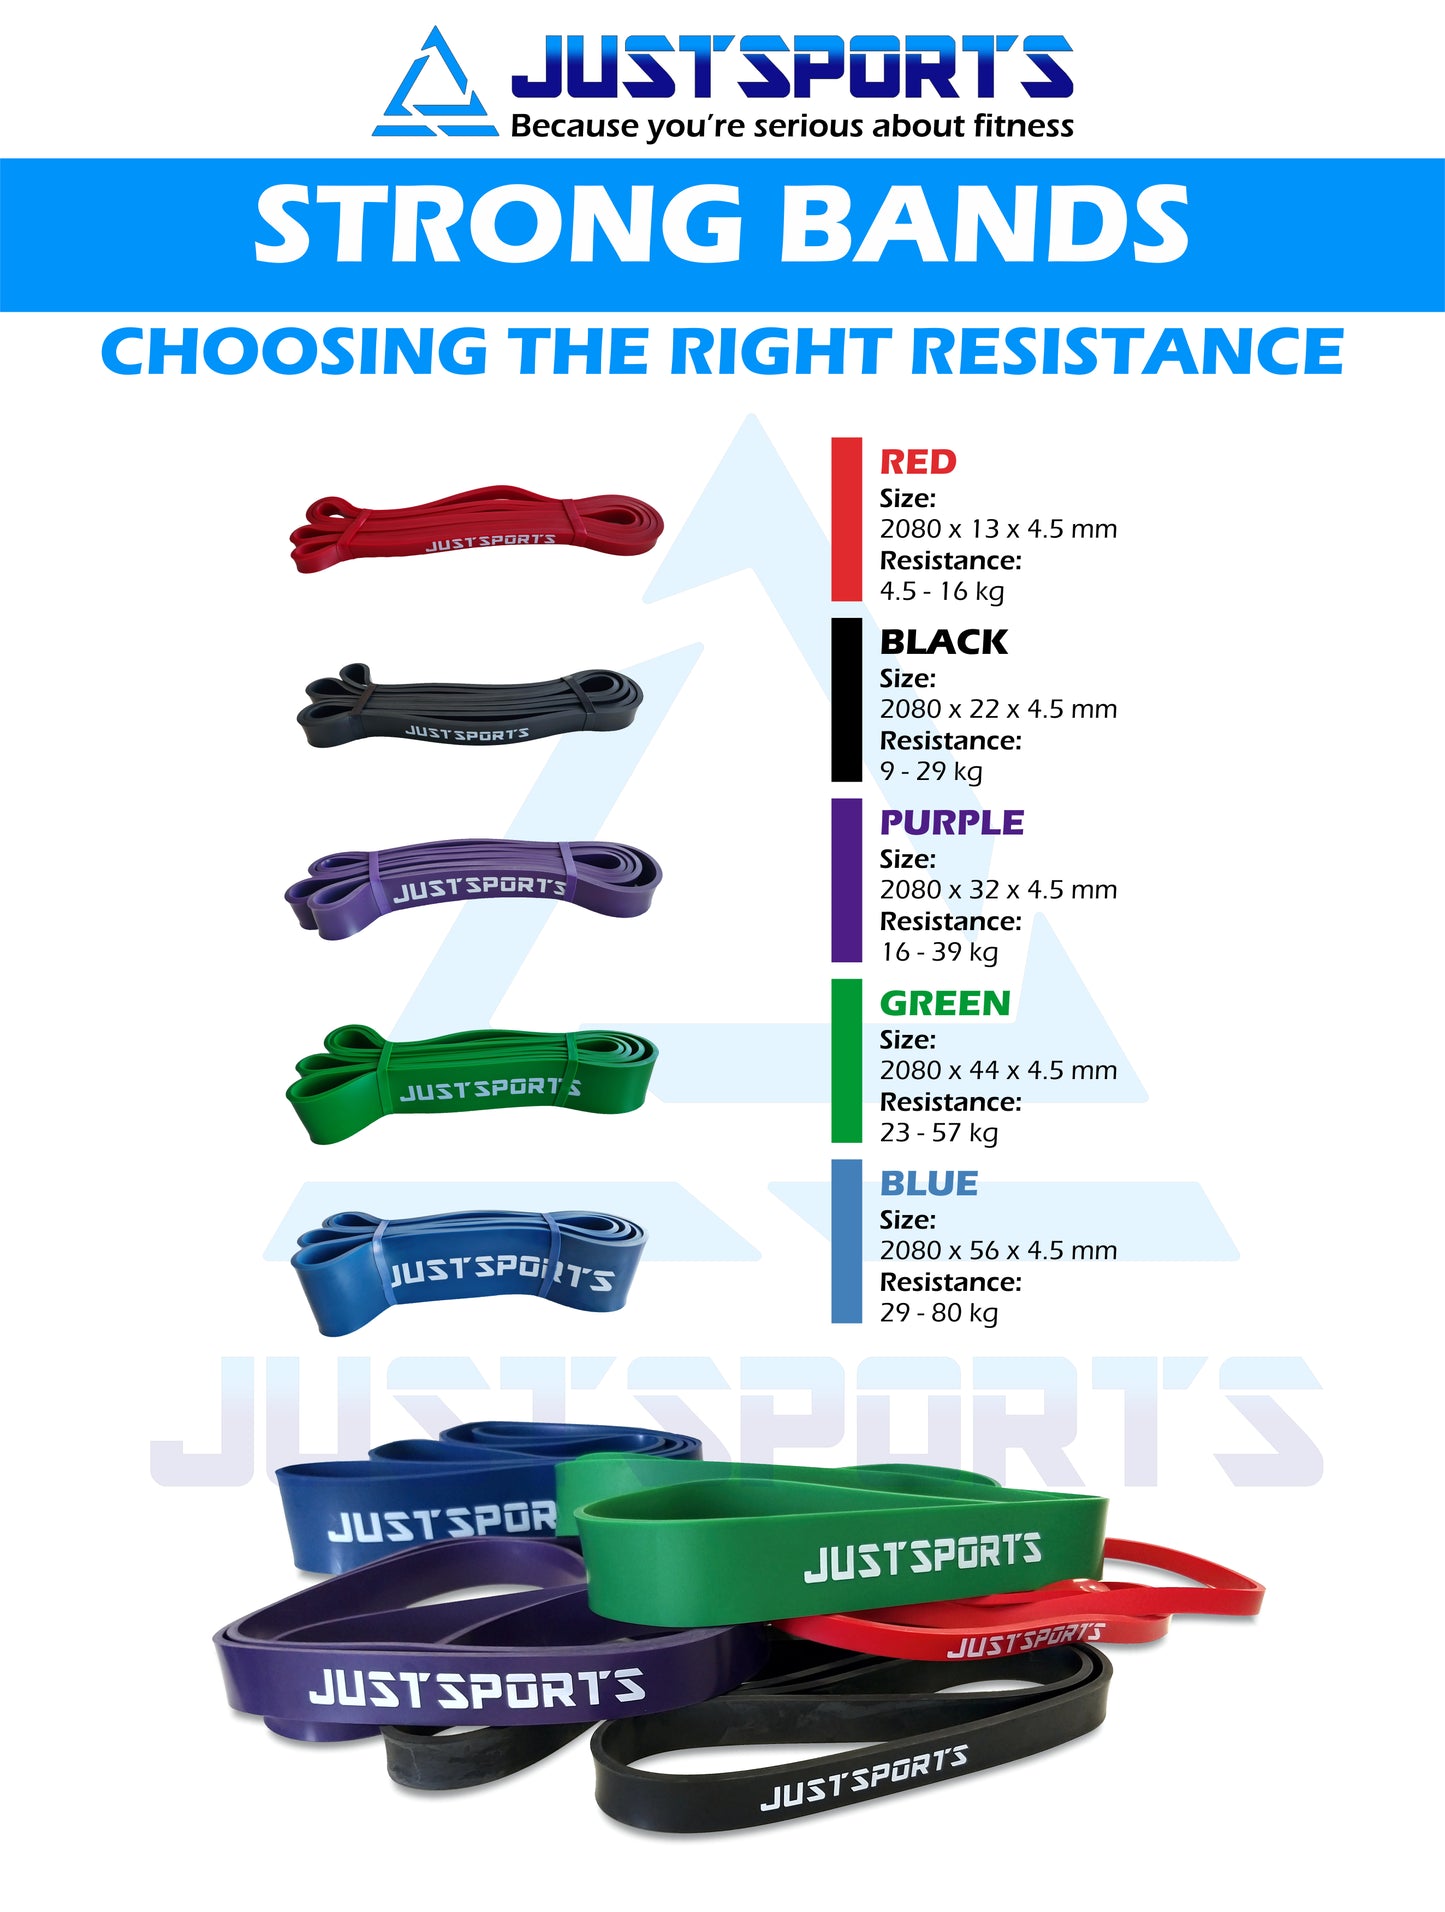 Strong bands